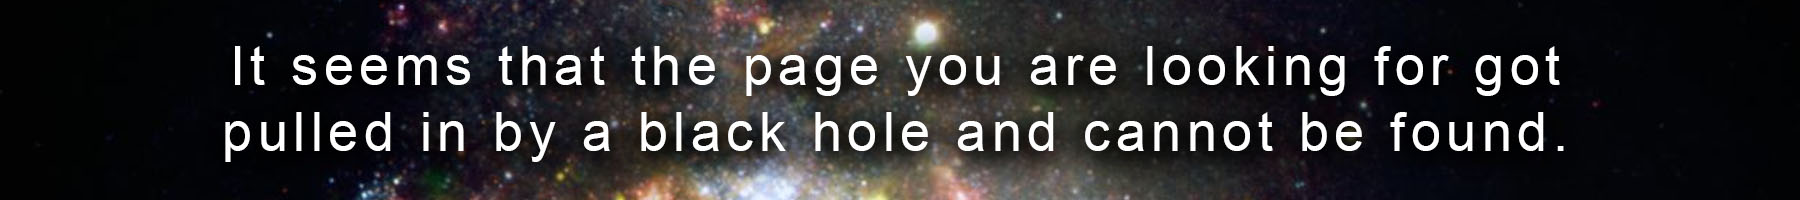 Banner image of black hole with message stating it seems that the page you are looking for got pulled in by a black hole and cannot be found